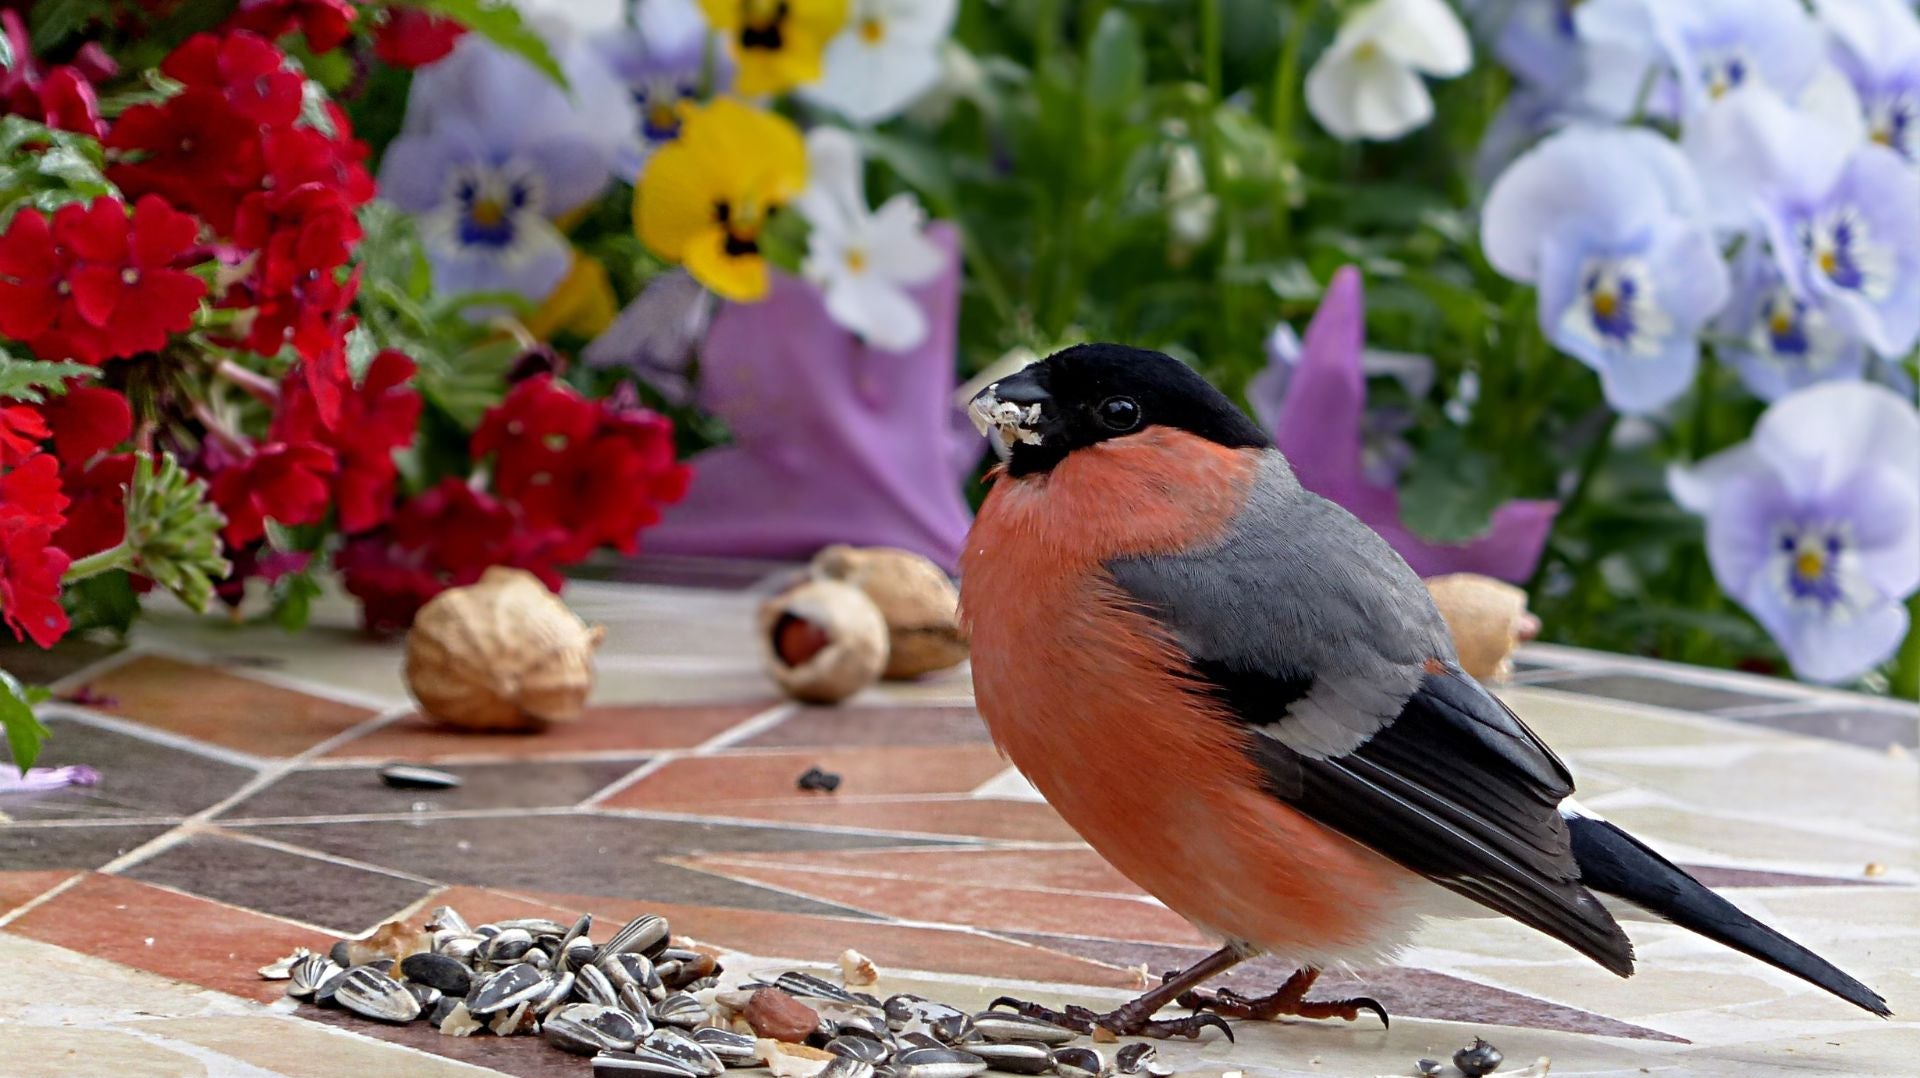 The 5 Best Bird Seeds for Attracting Ontario's Feathered Friends To Your Garden